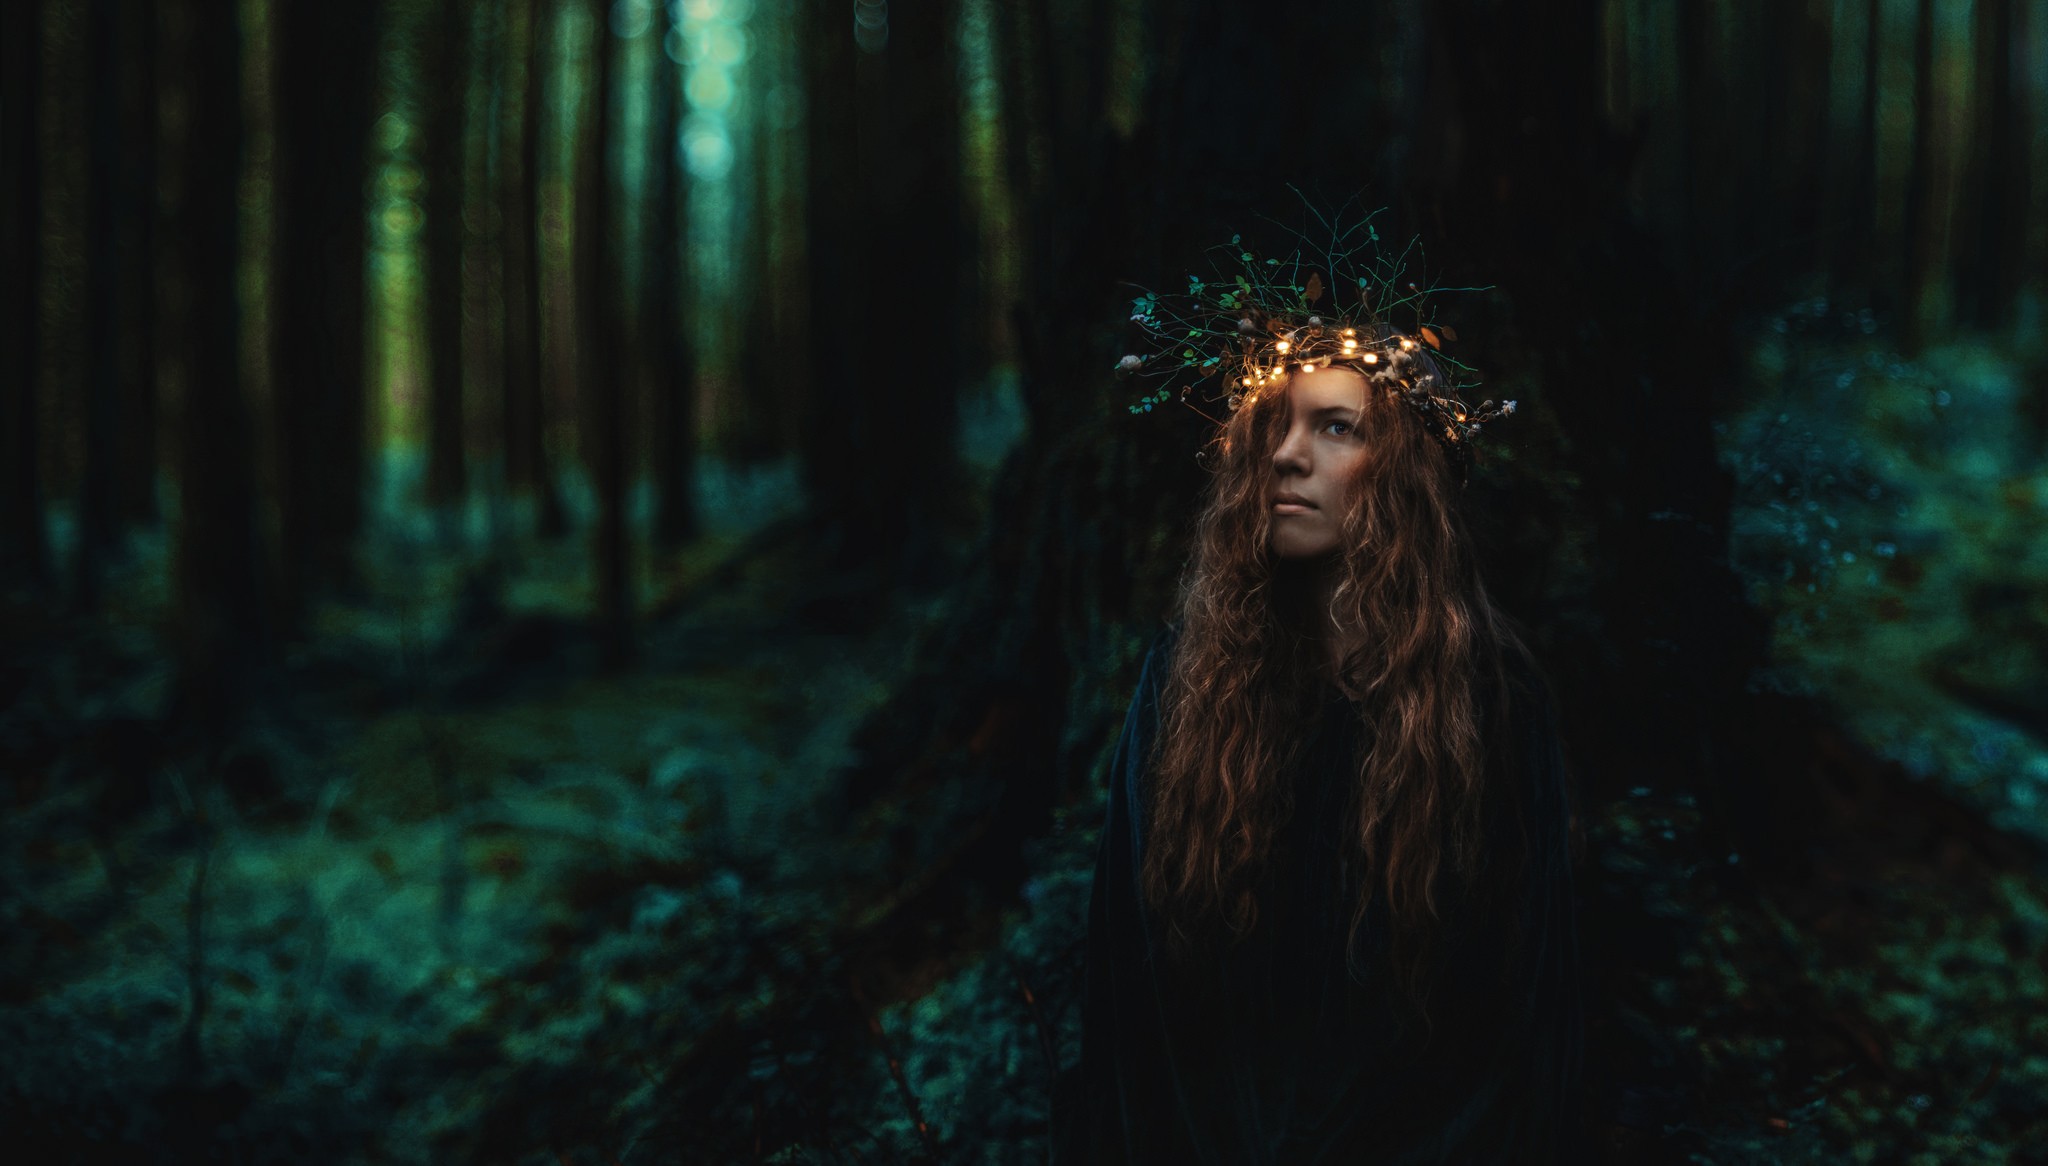 People 2048x1166 women forest curly hair crown dark deep forest women outdoors fantasy girl outdoors long hair trees model redhead plants